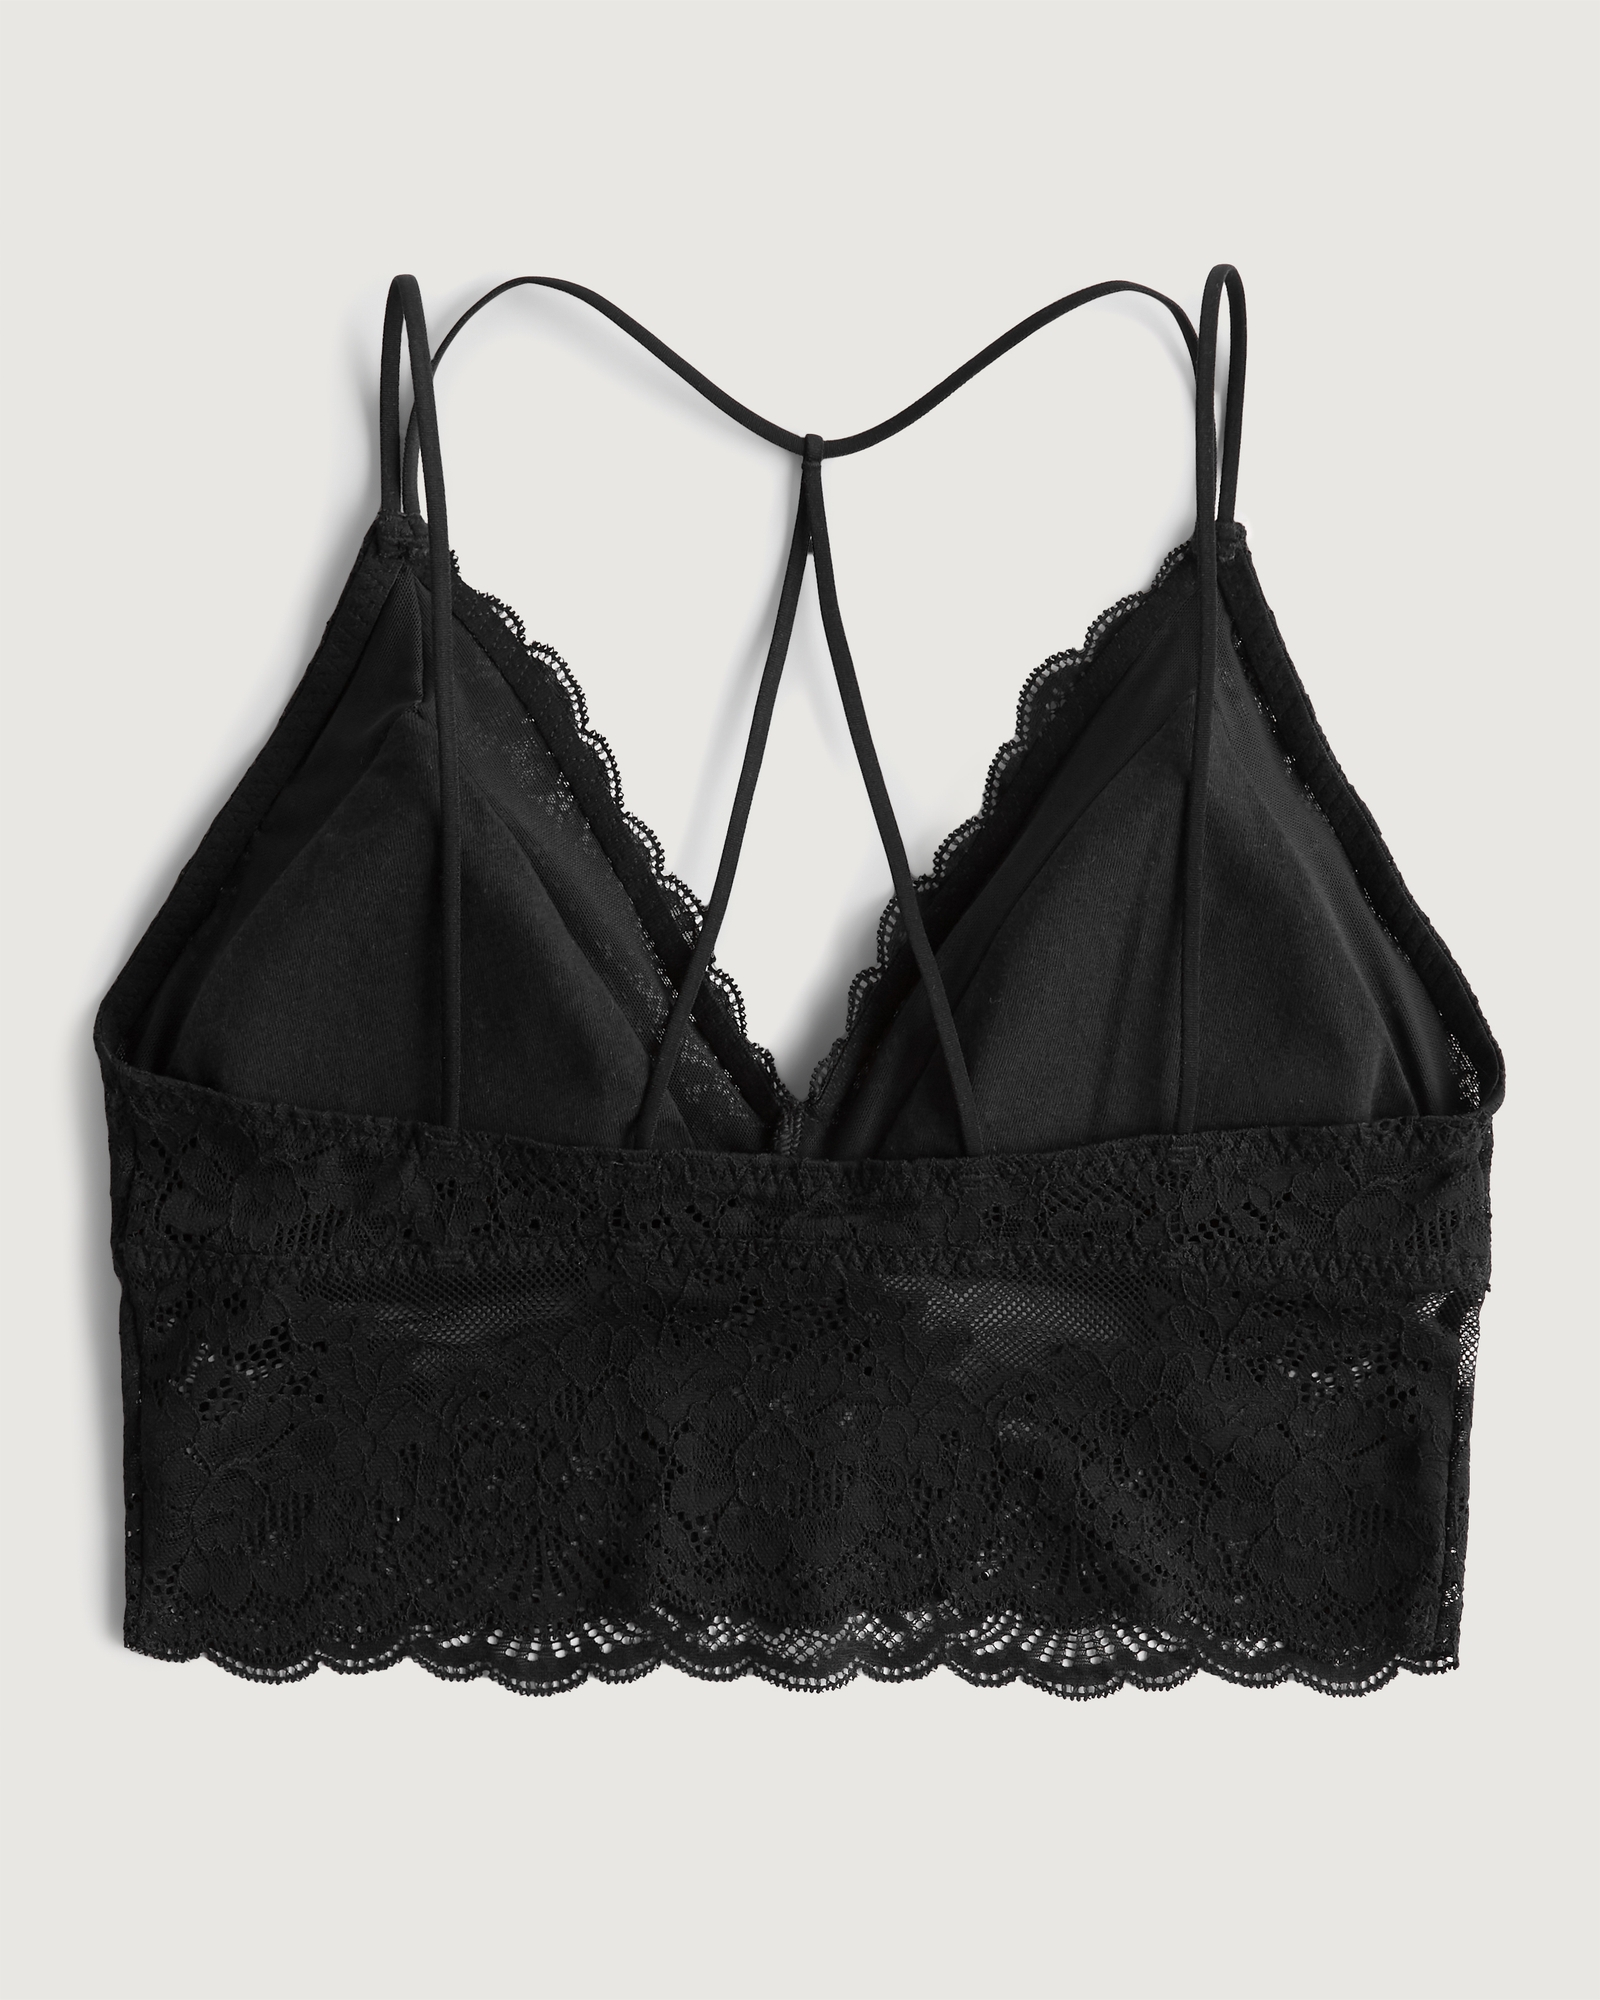 Gilly Hicks bras/braletts are my new favourite! They come in